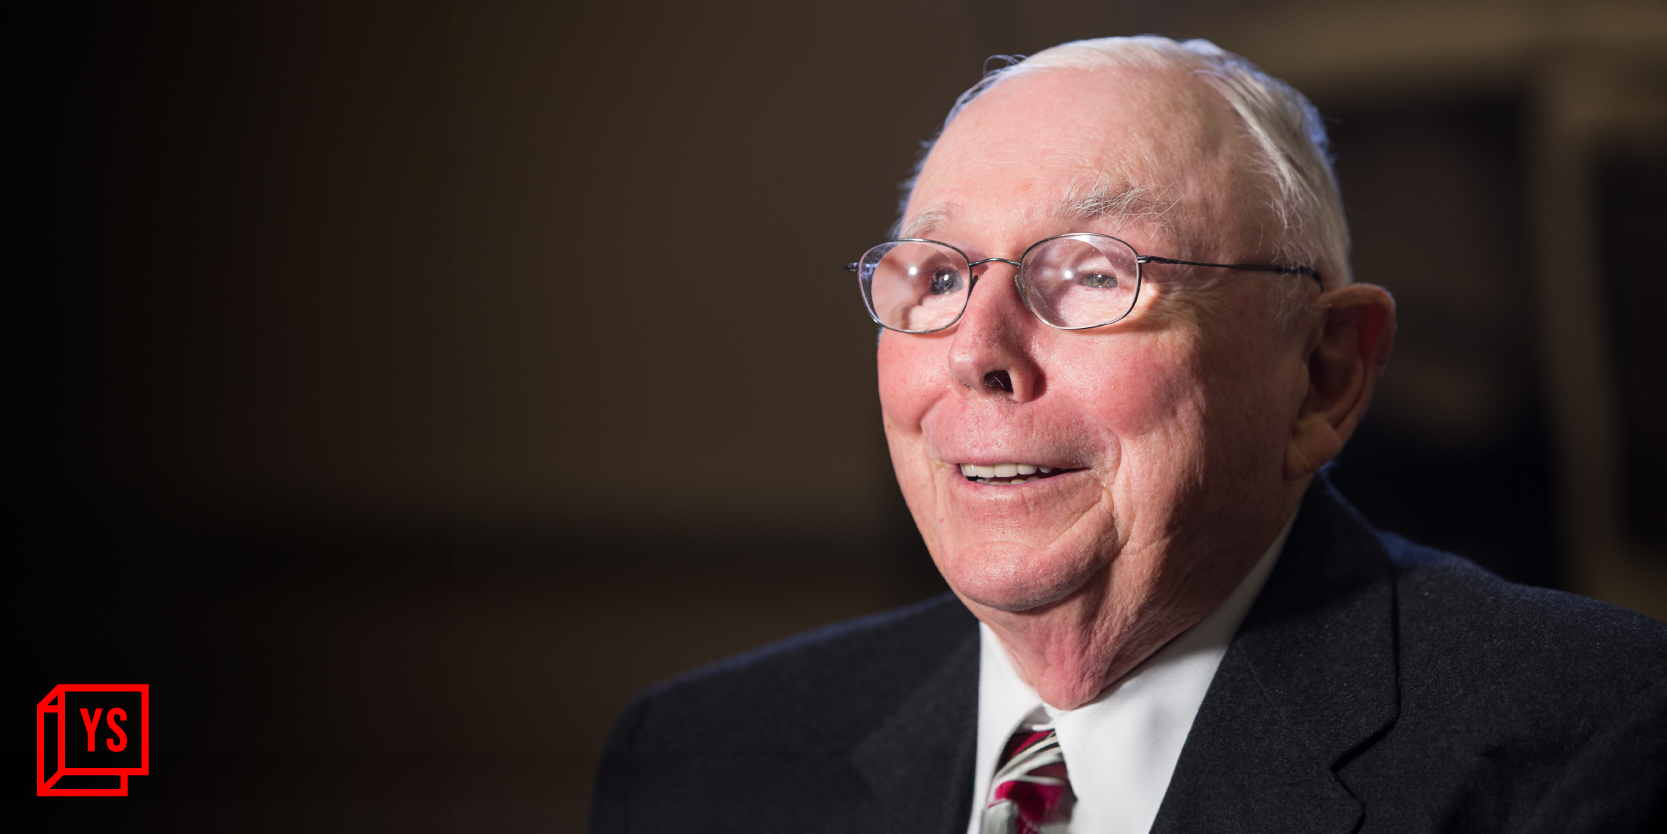 Charles Munger, Buffet's close aide, dies at age 99